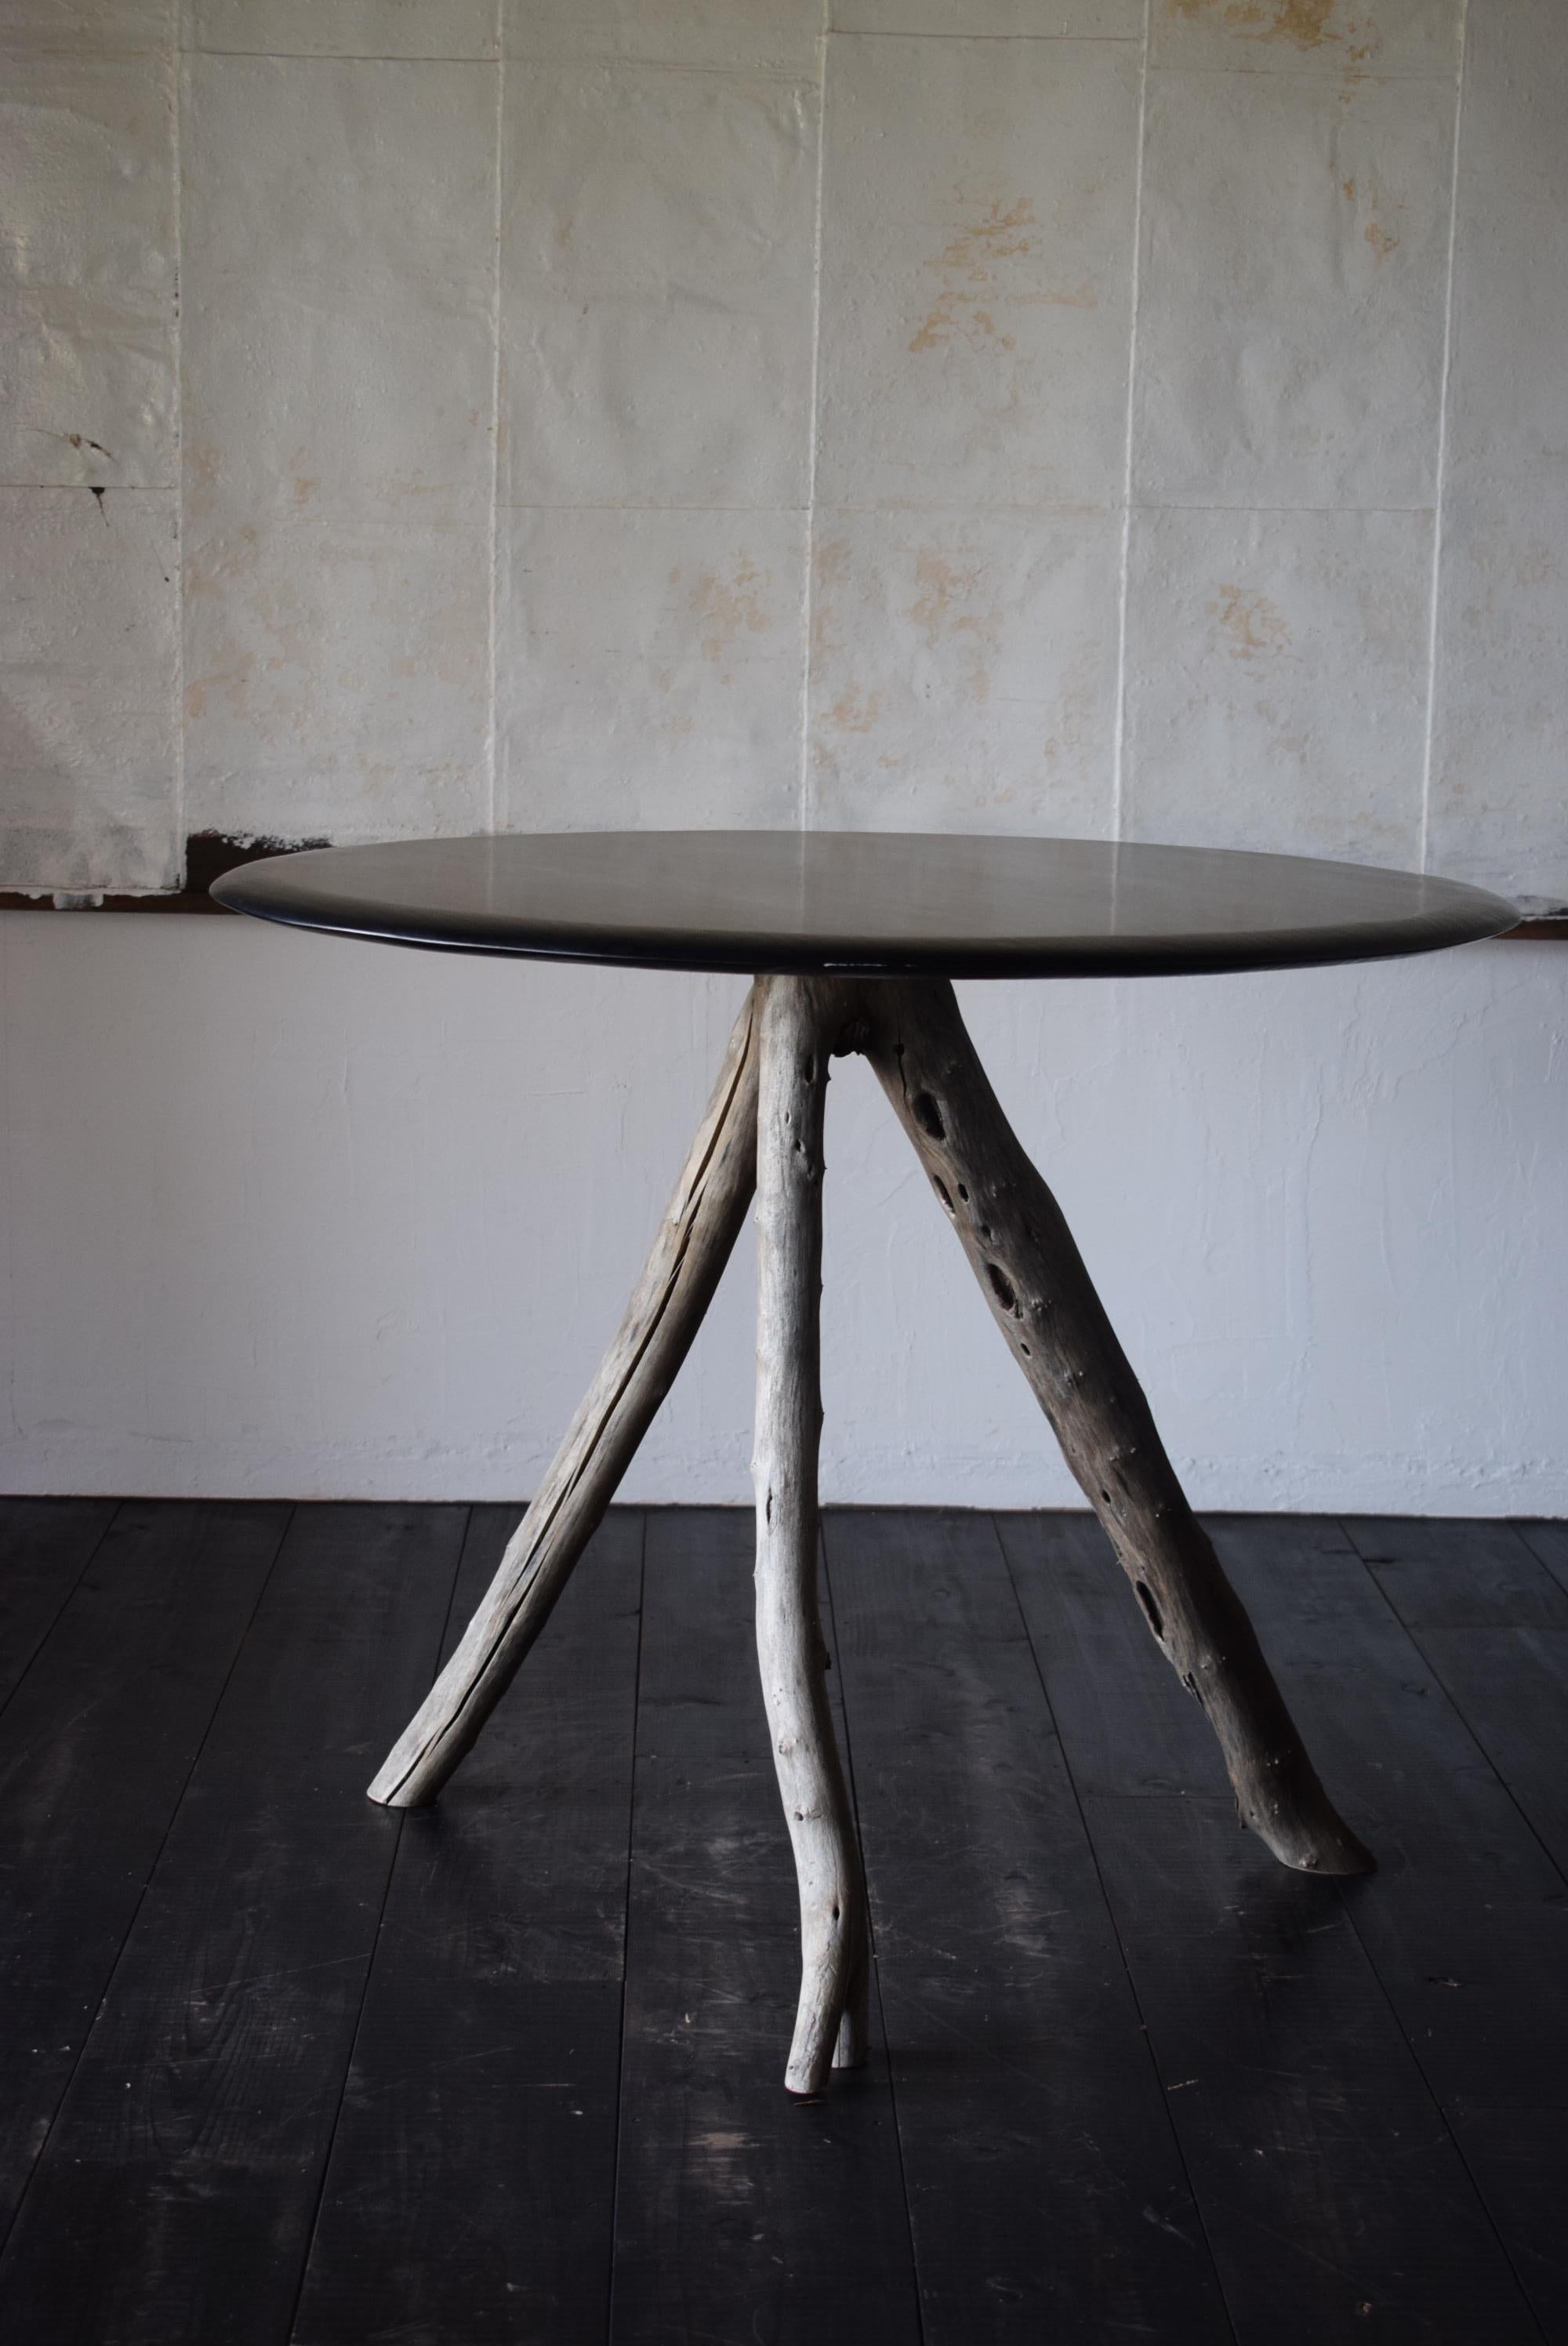 Japanese Driftwood Table /Exhibition Table / Flower Stand /Wabisabi Table 4